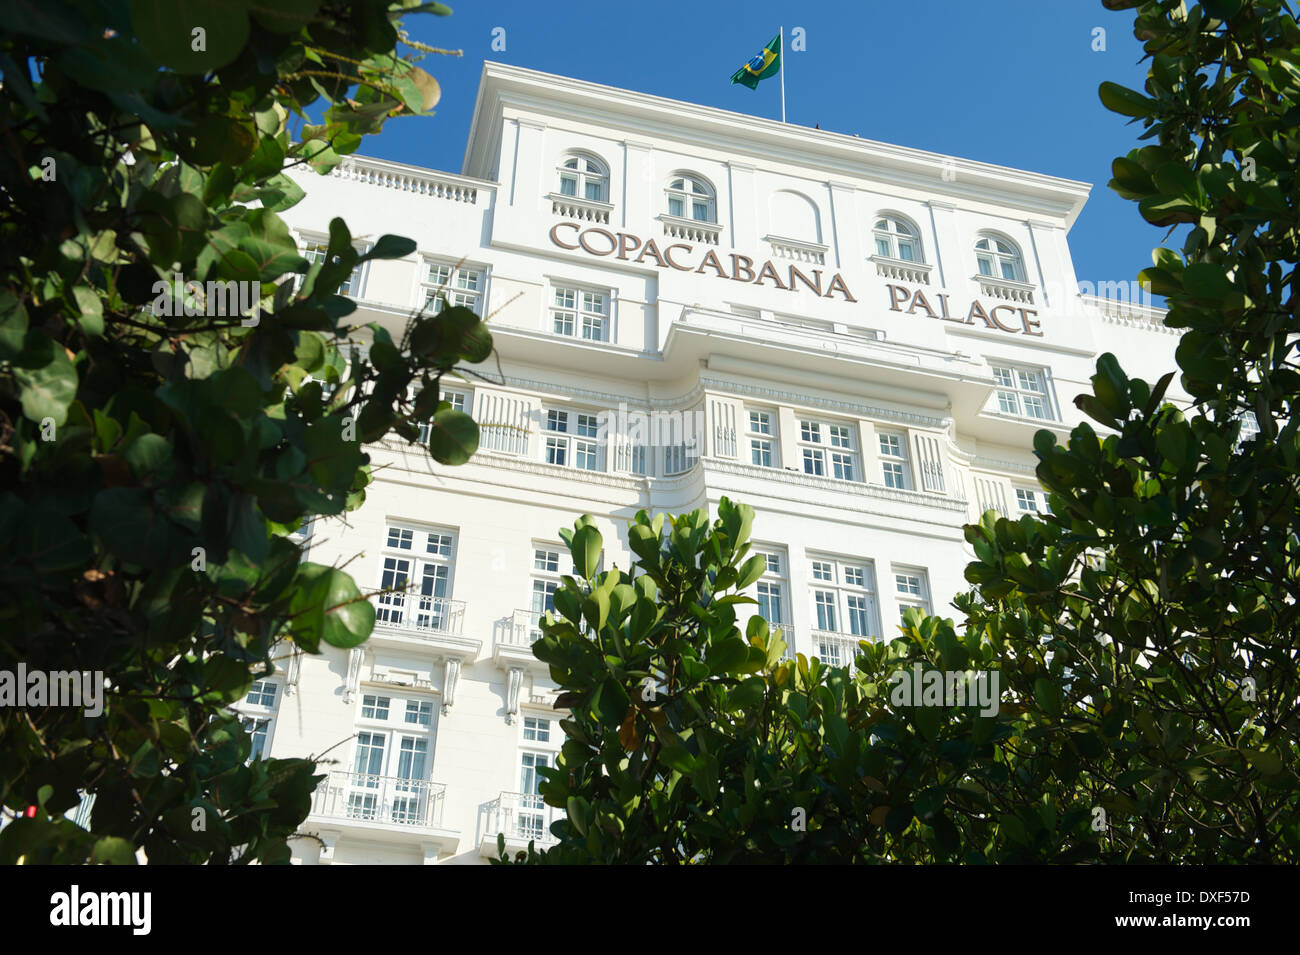 RIO DE JANEIRO, BRAZIL - FEBRUARY 11, 2014: Facade of the Copacabana Palace Hotel, whose design was based on the style of hotels Stock Photo